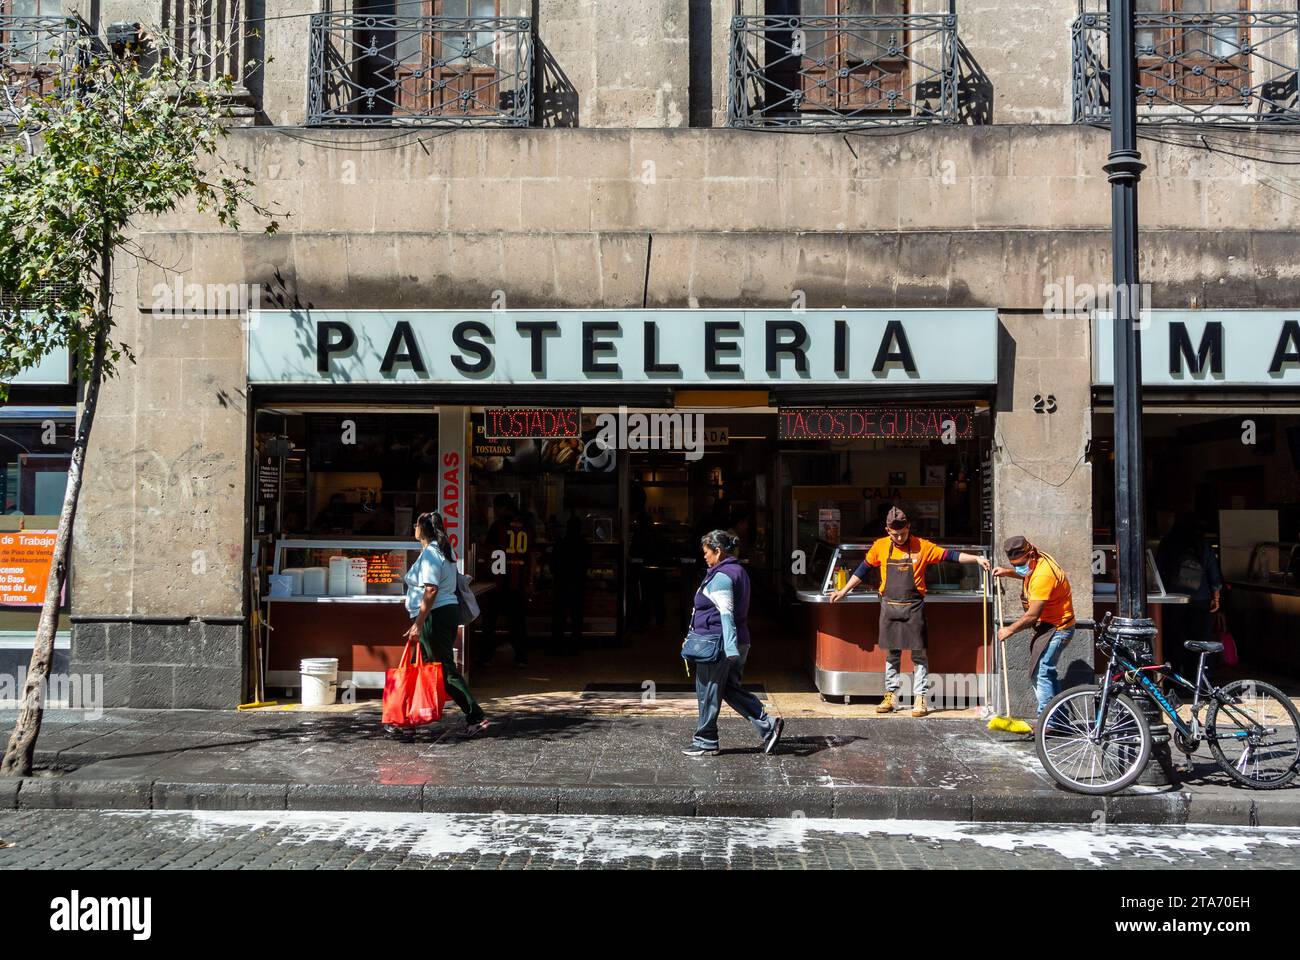 Mexico City, CDMX, Mexico, Pasteleria Madrid is a cafeteria and restaurant in centro district of Mexico city, Editorial only. Stock Photo